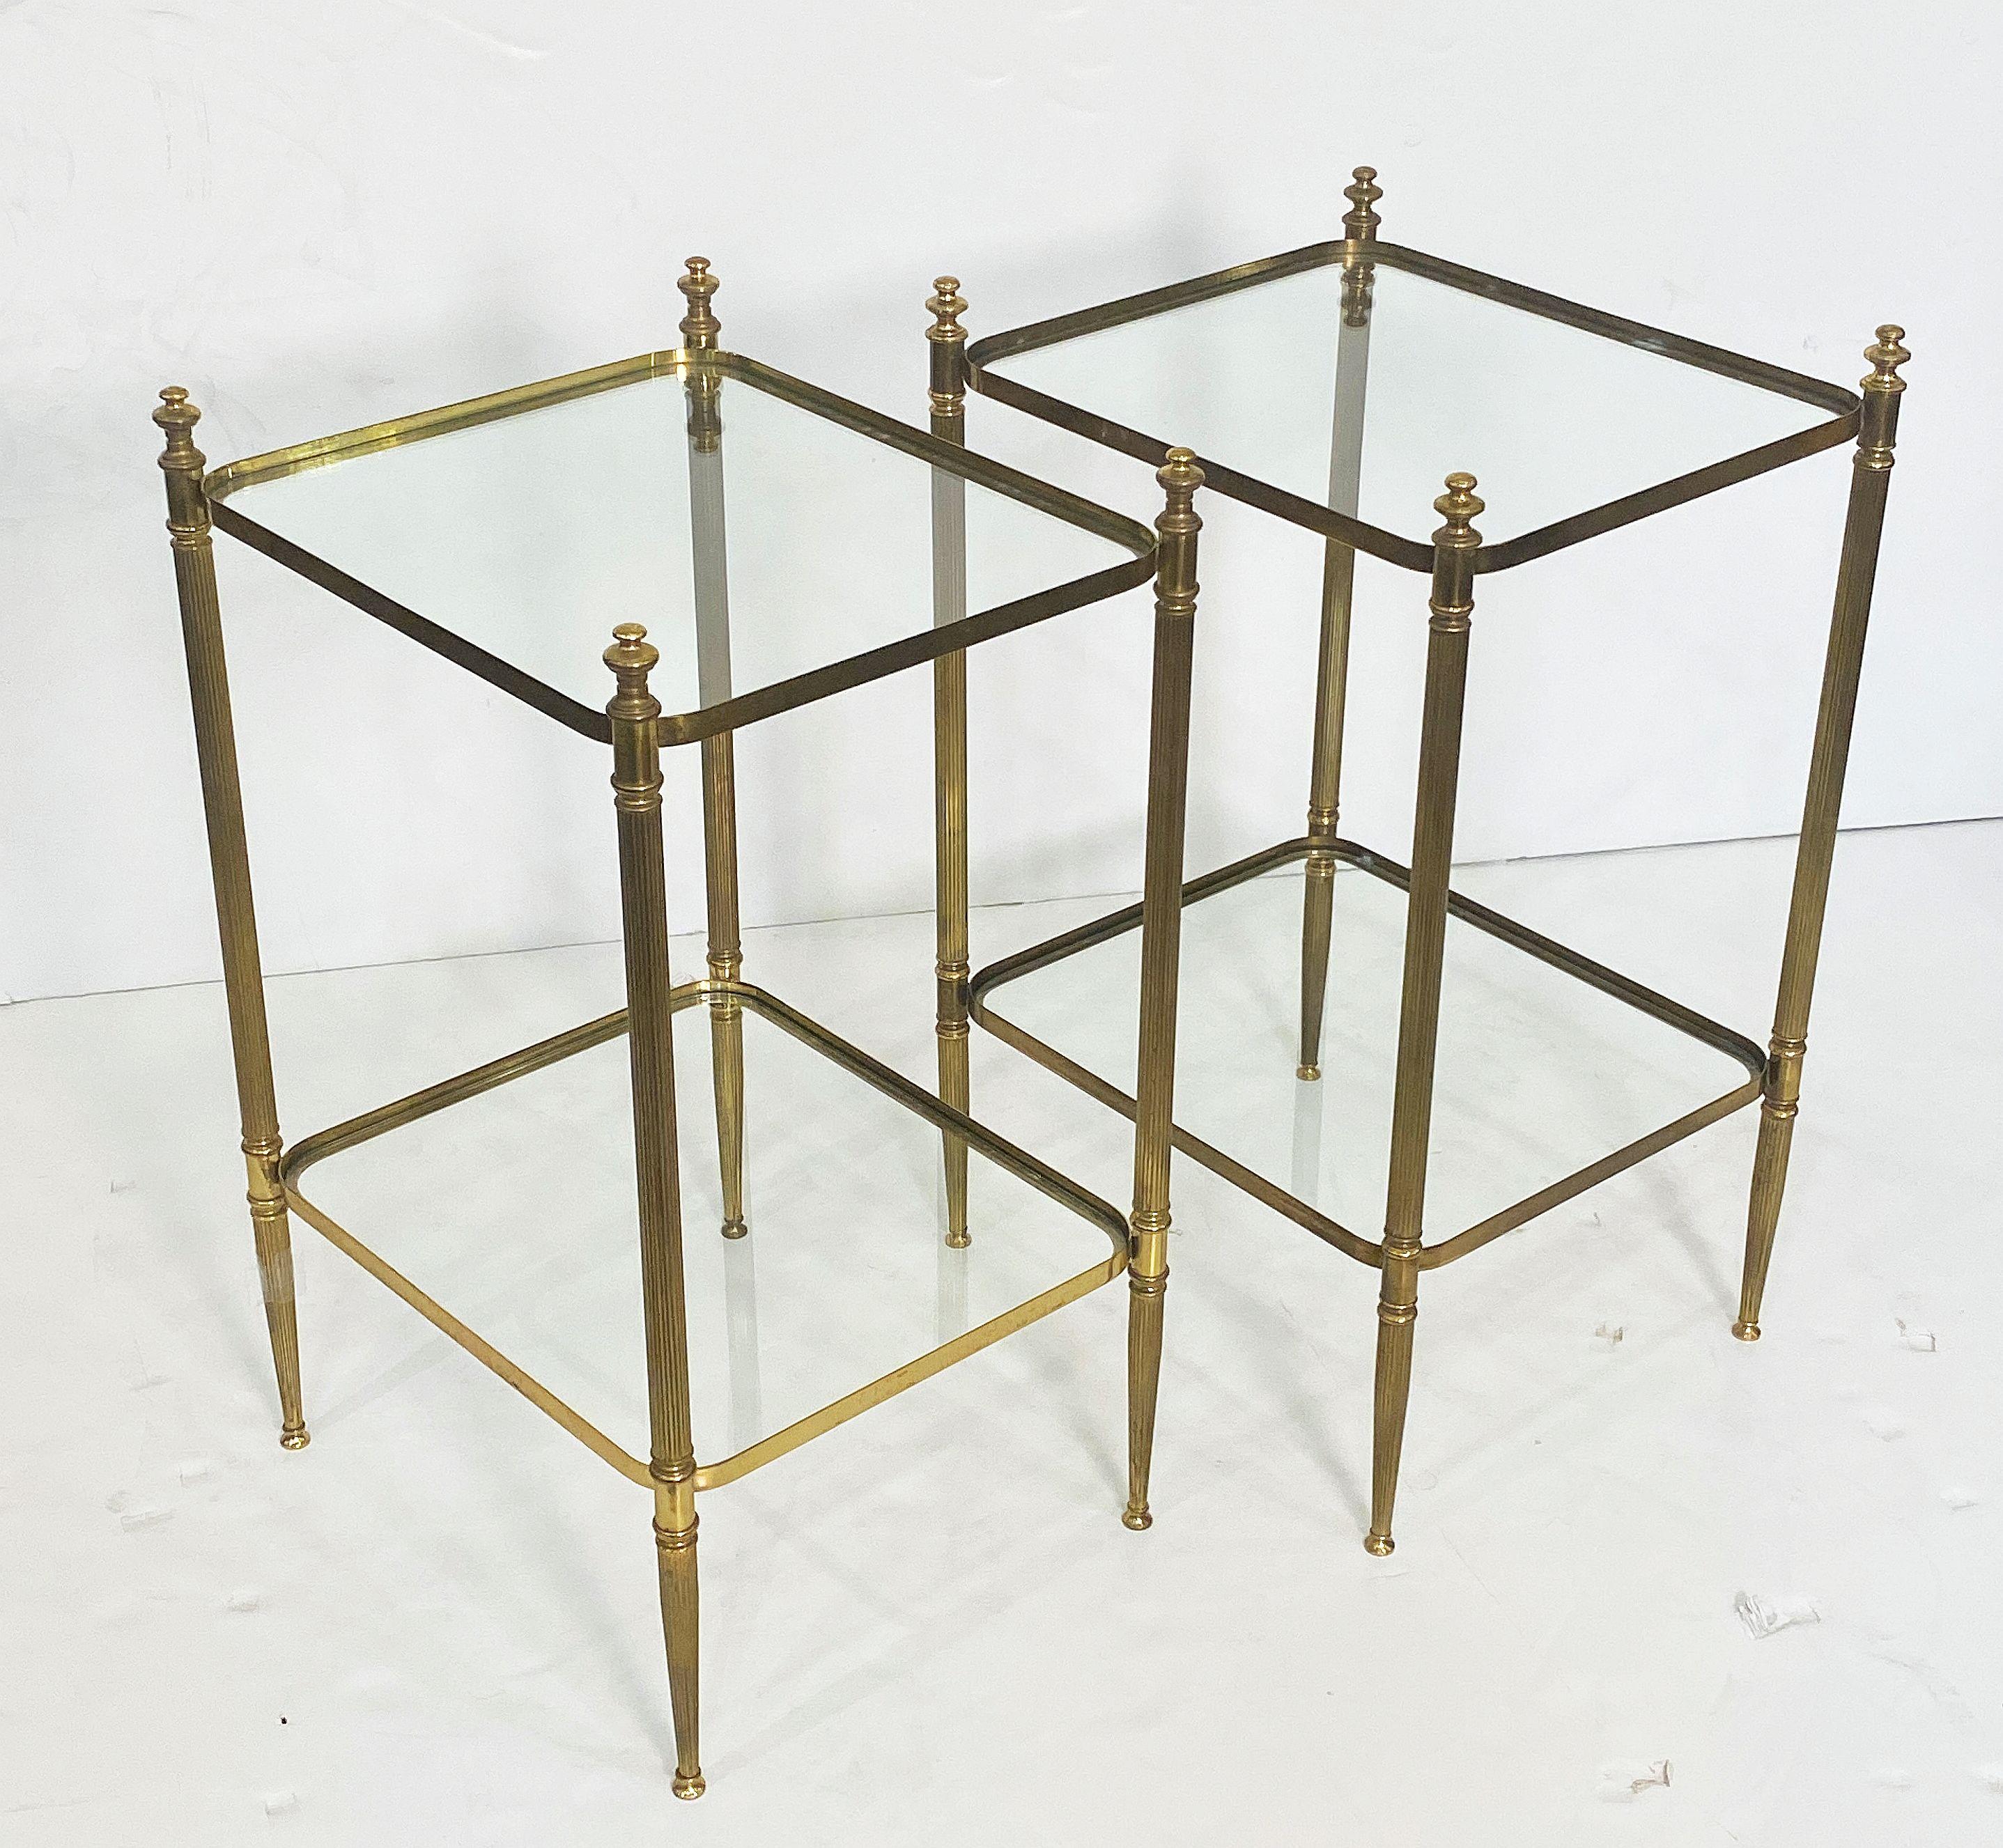 A pair of fine French Mid-Century two-tiered side or end tables - each table featuring two rectangular glass panels with rounded corners inset upon a brass frame with finial accents and reeded, tapering legs

Dimensions: Height 26 1/4 inches x